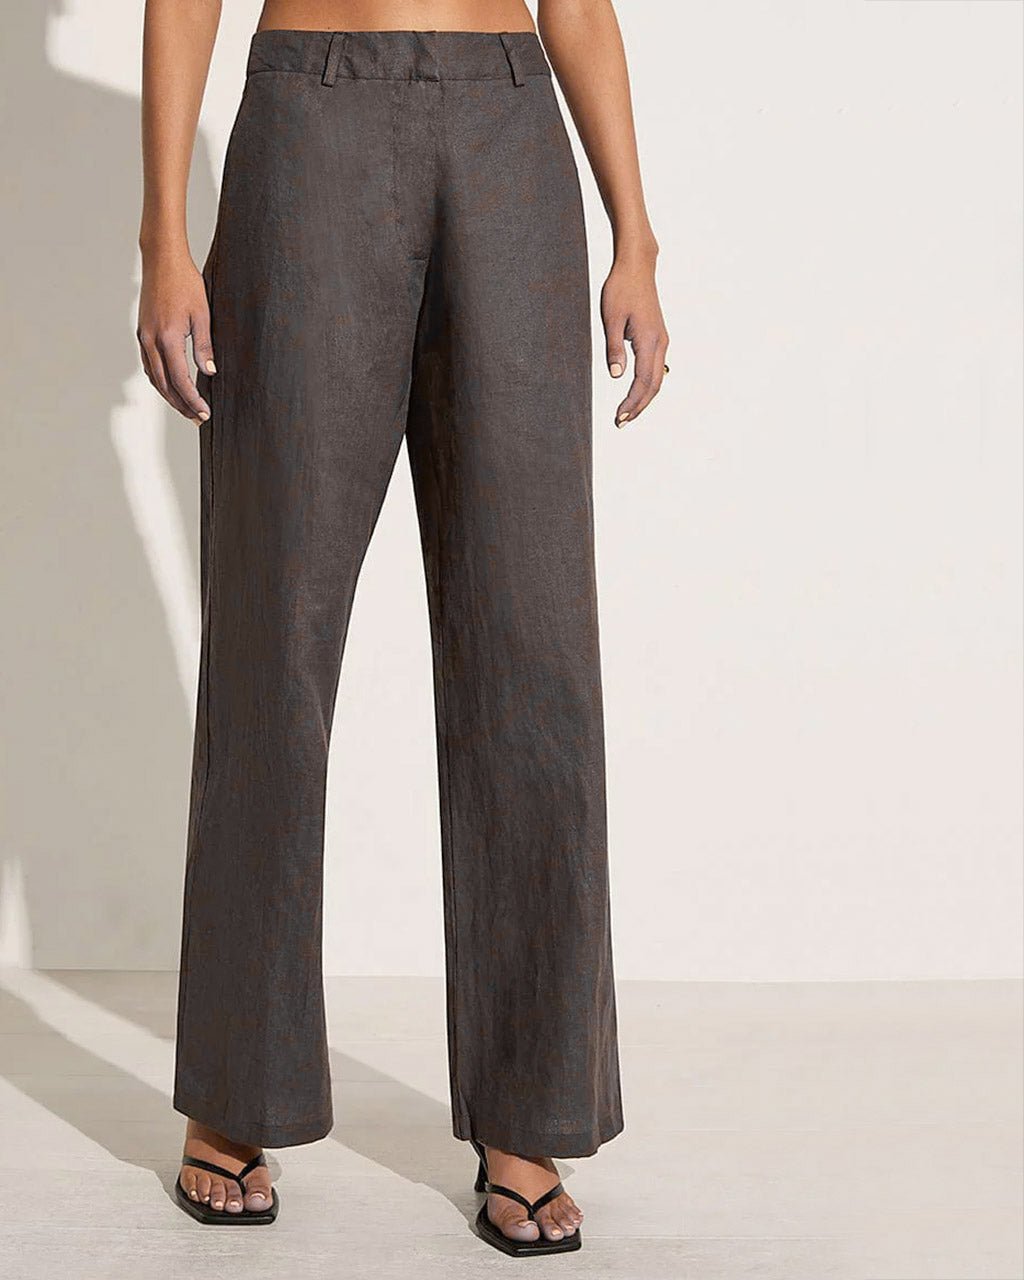 Rossio Pant in Charcoal